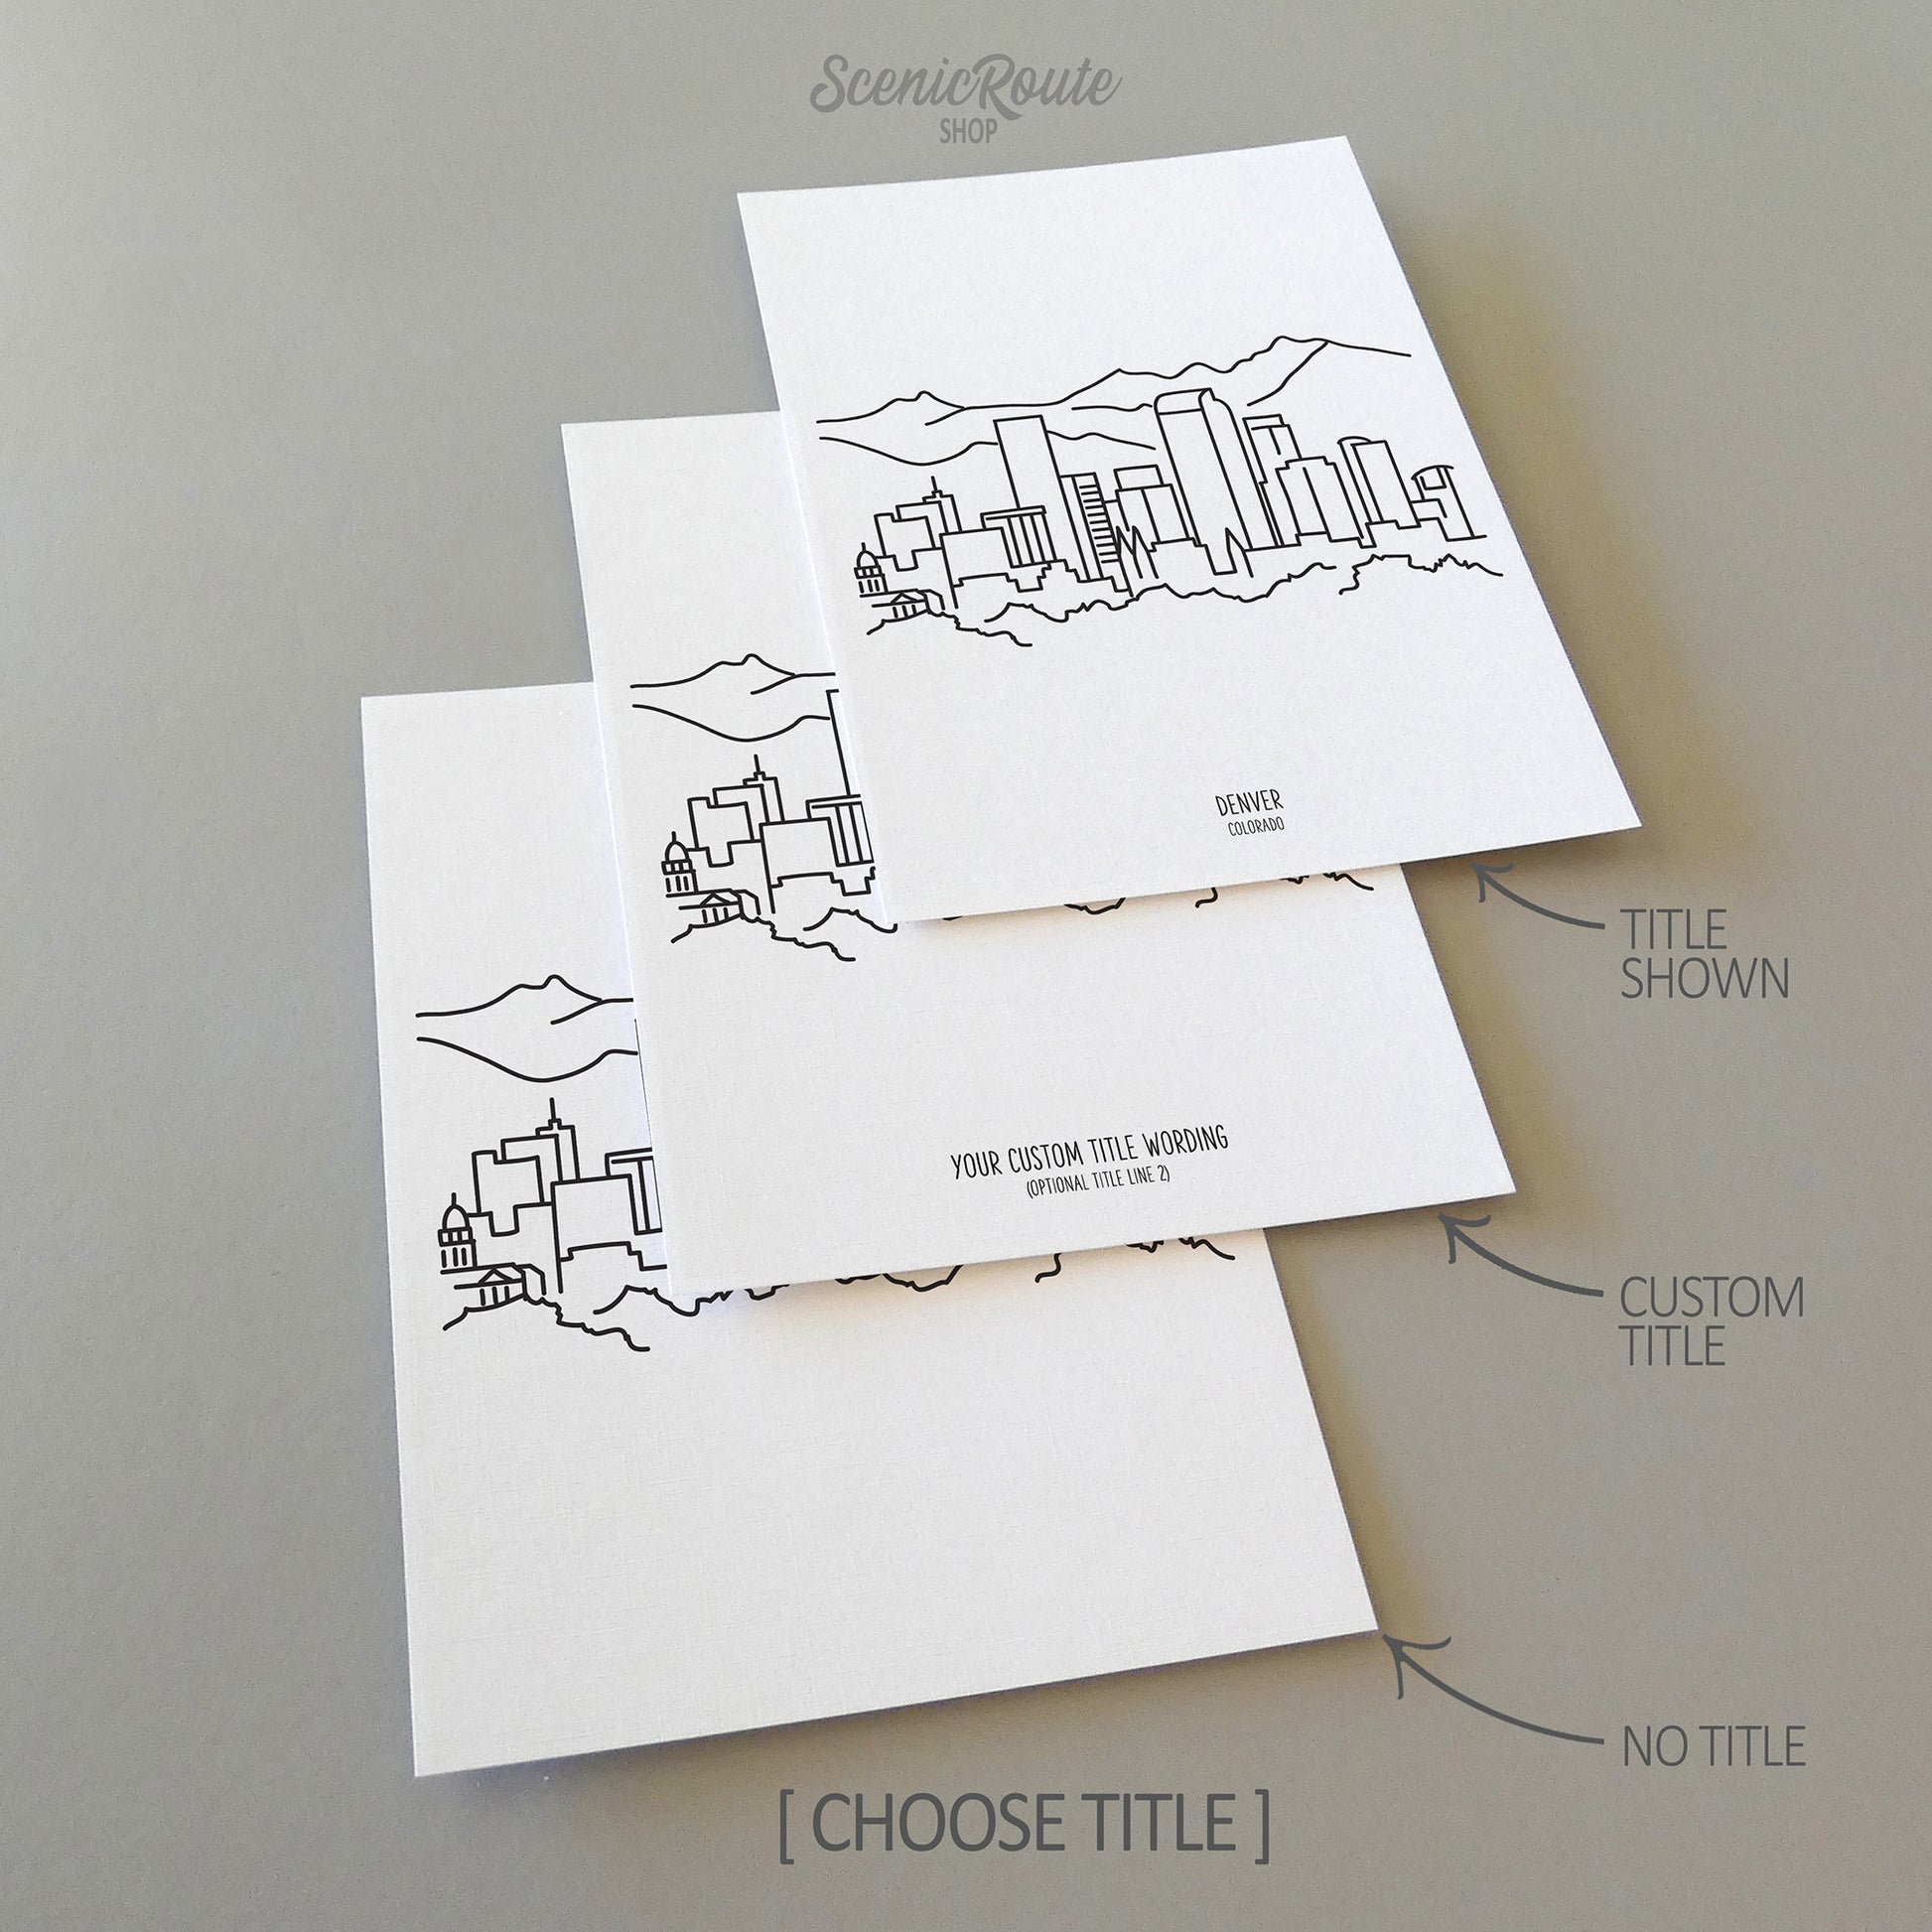 Three line art drawings of the Denver Colorado Skyline on white linen paper with a gray background. The pieces are shown with title options that can be chosen and personalized.